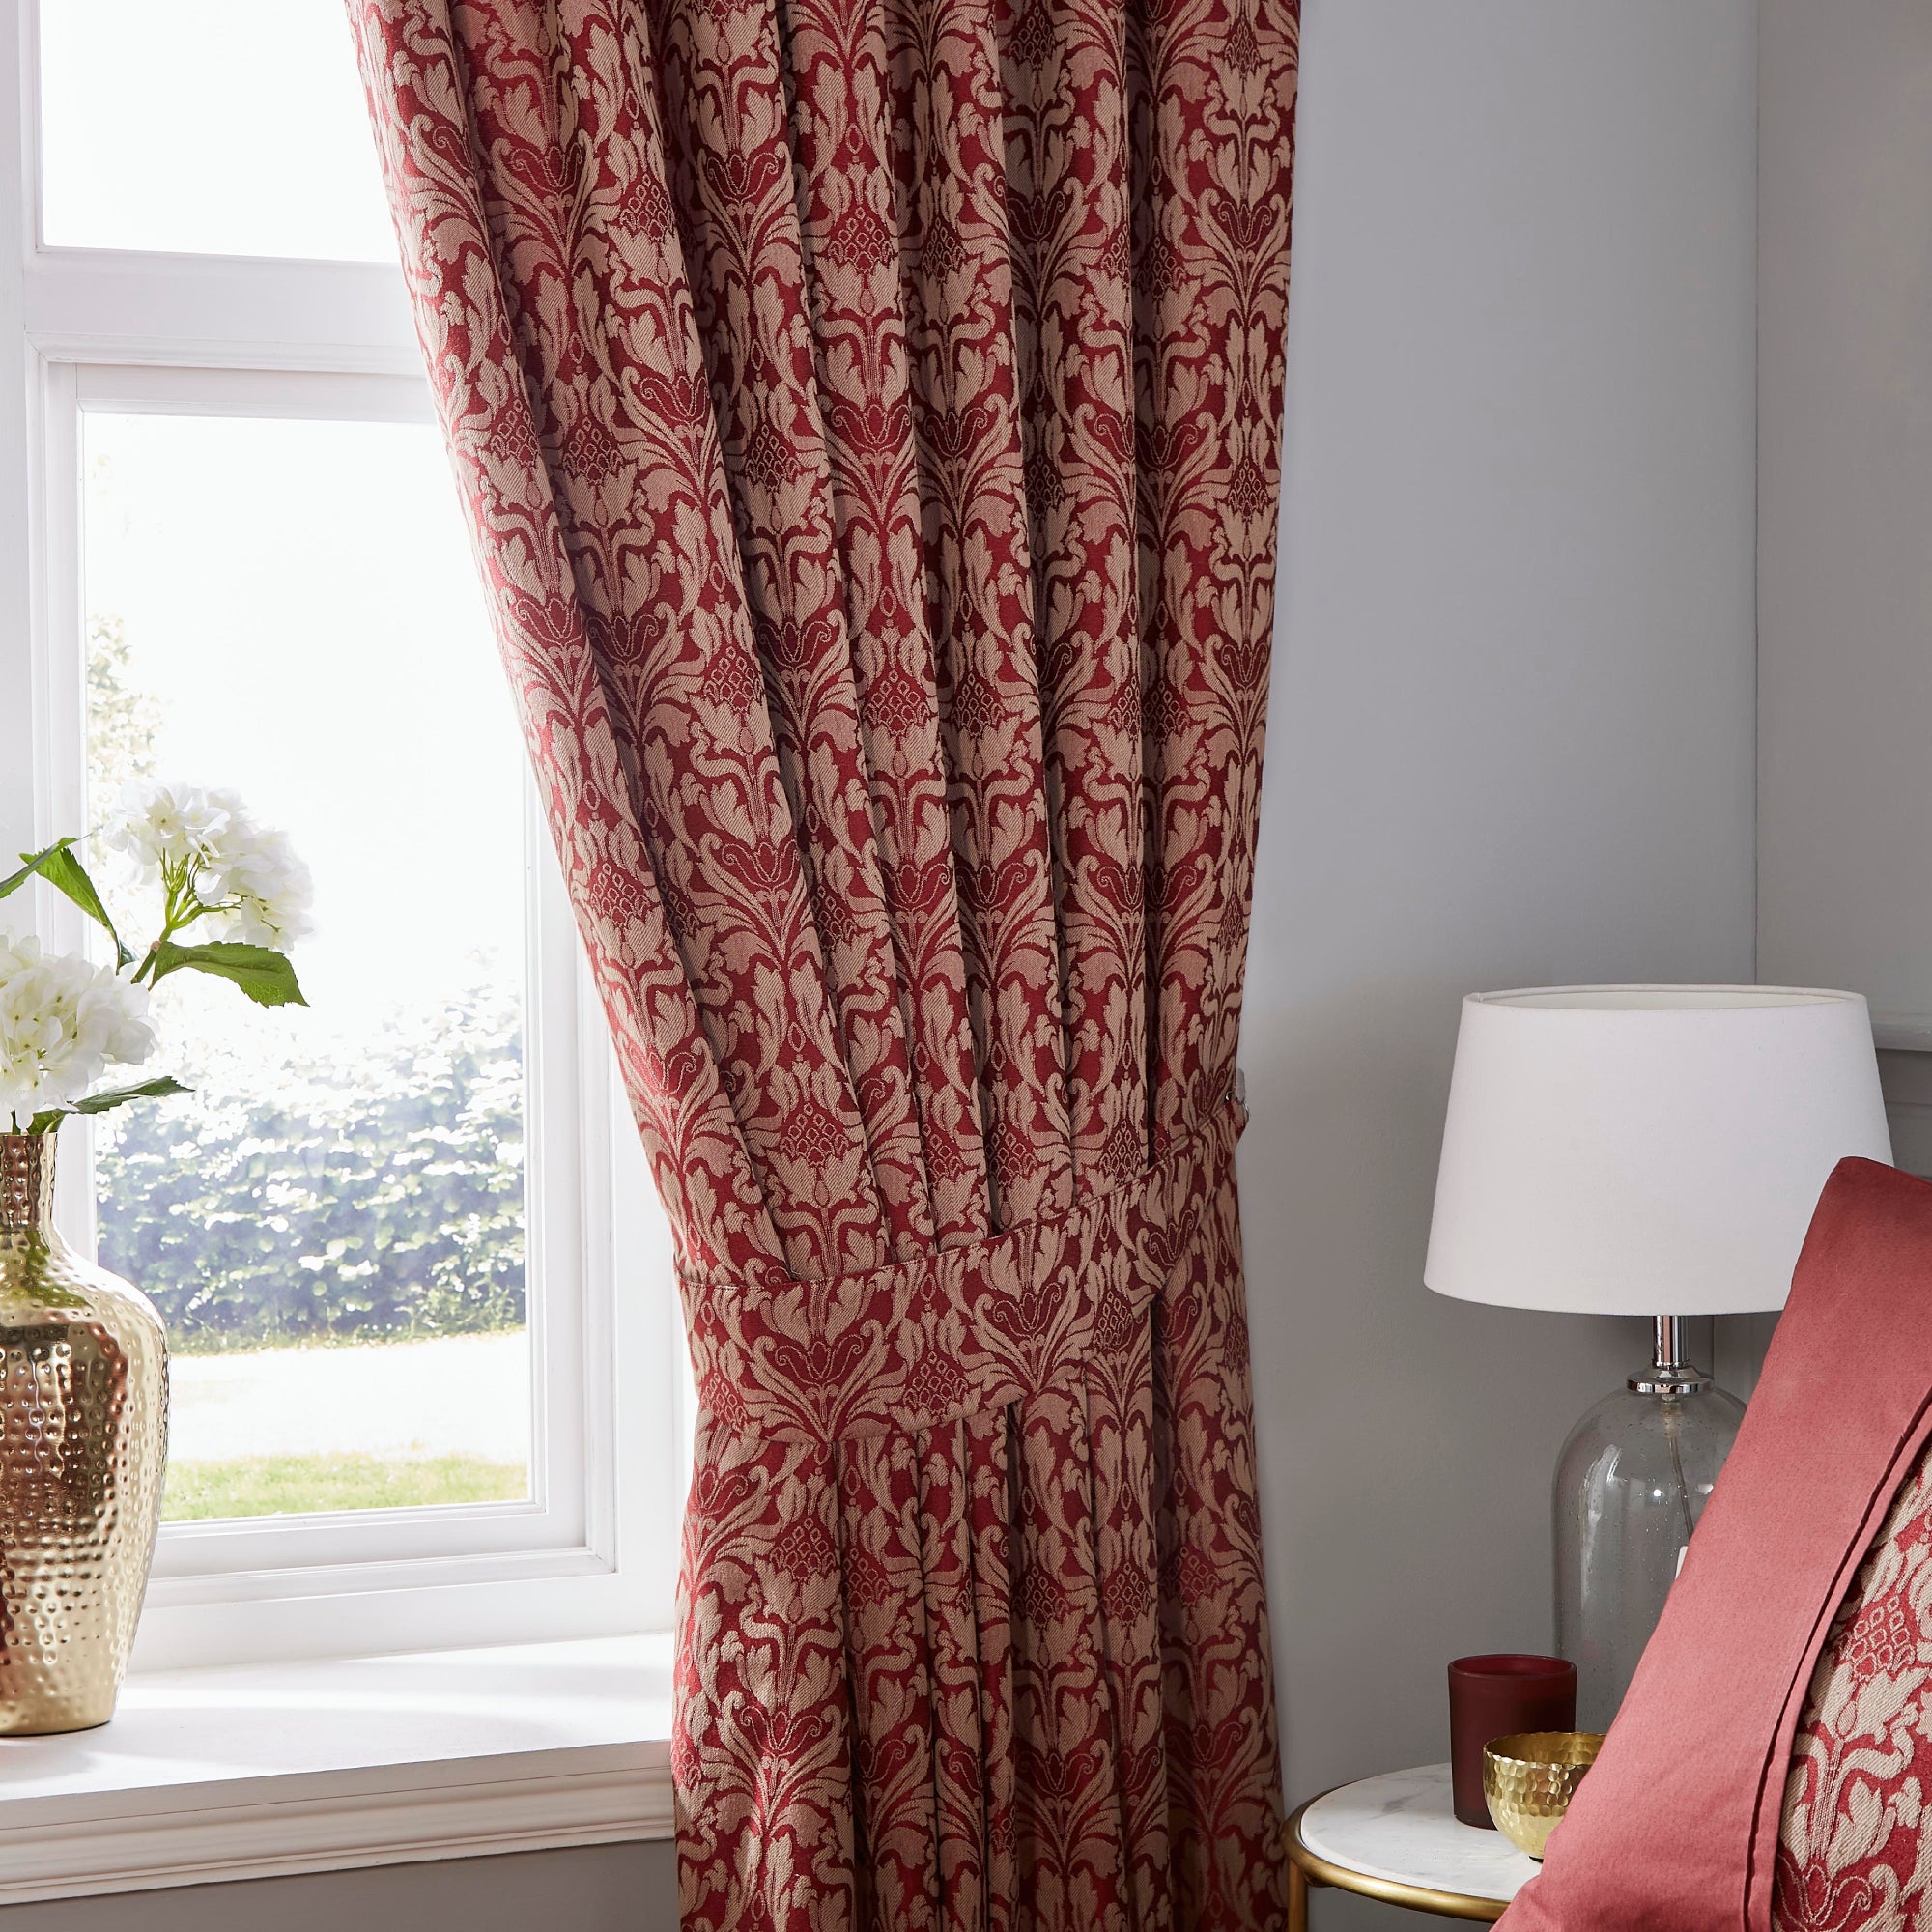 Pair of Pencil Pleat Curtains With Tie-Backs Hawthorne by Dreams & Drapes Woven in Burgundy